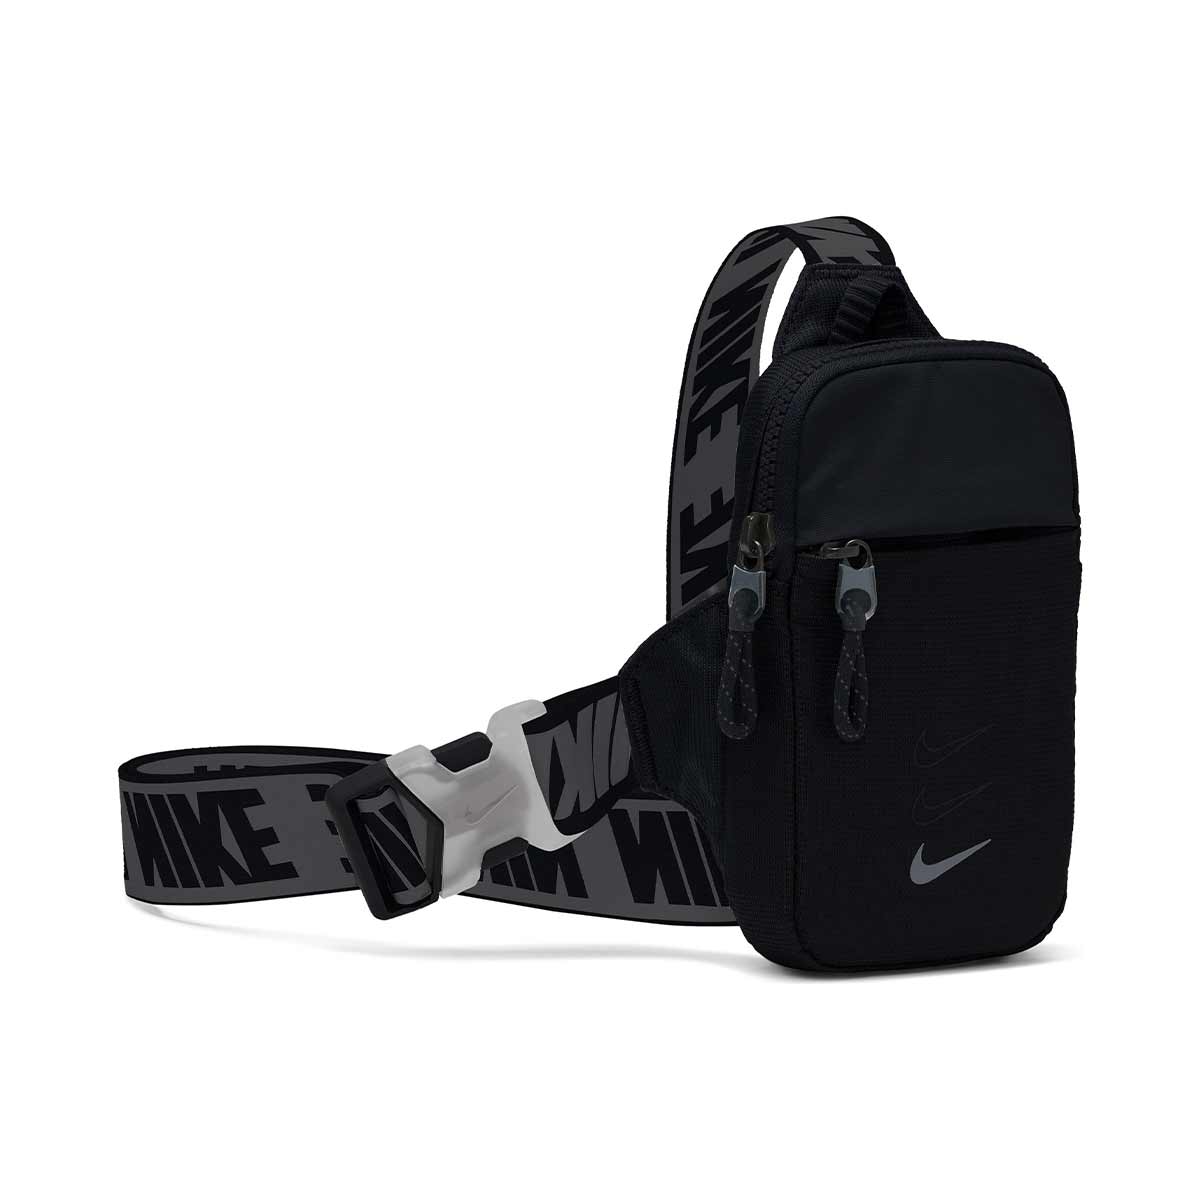 Unboxing/Reviewing The Nike Sportswear Essentials Crossbody Bag